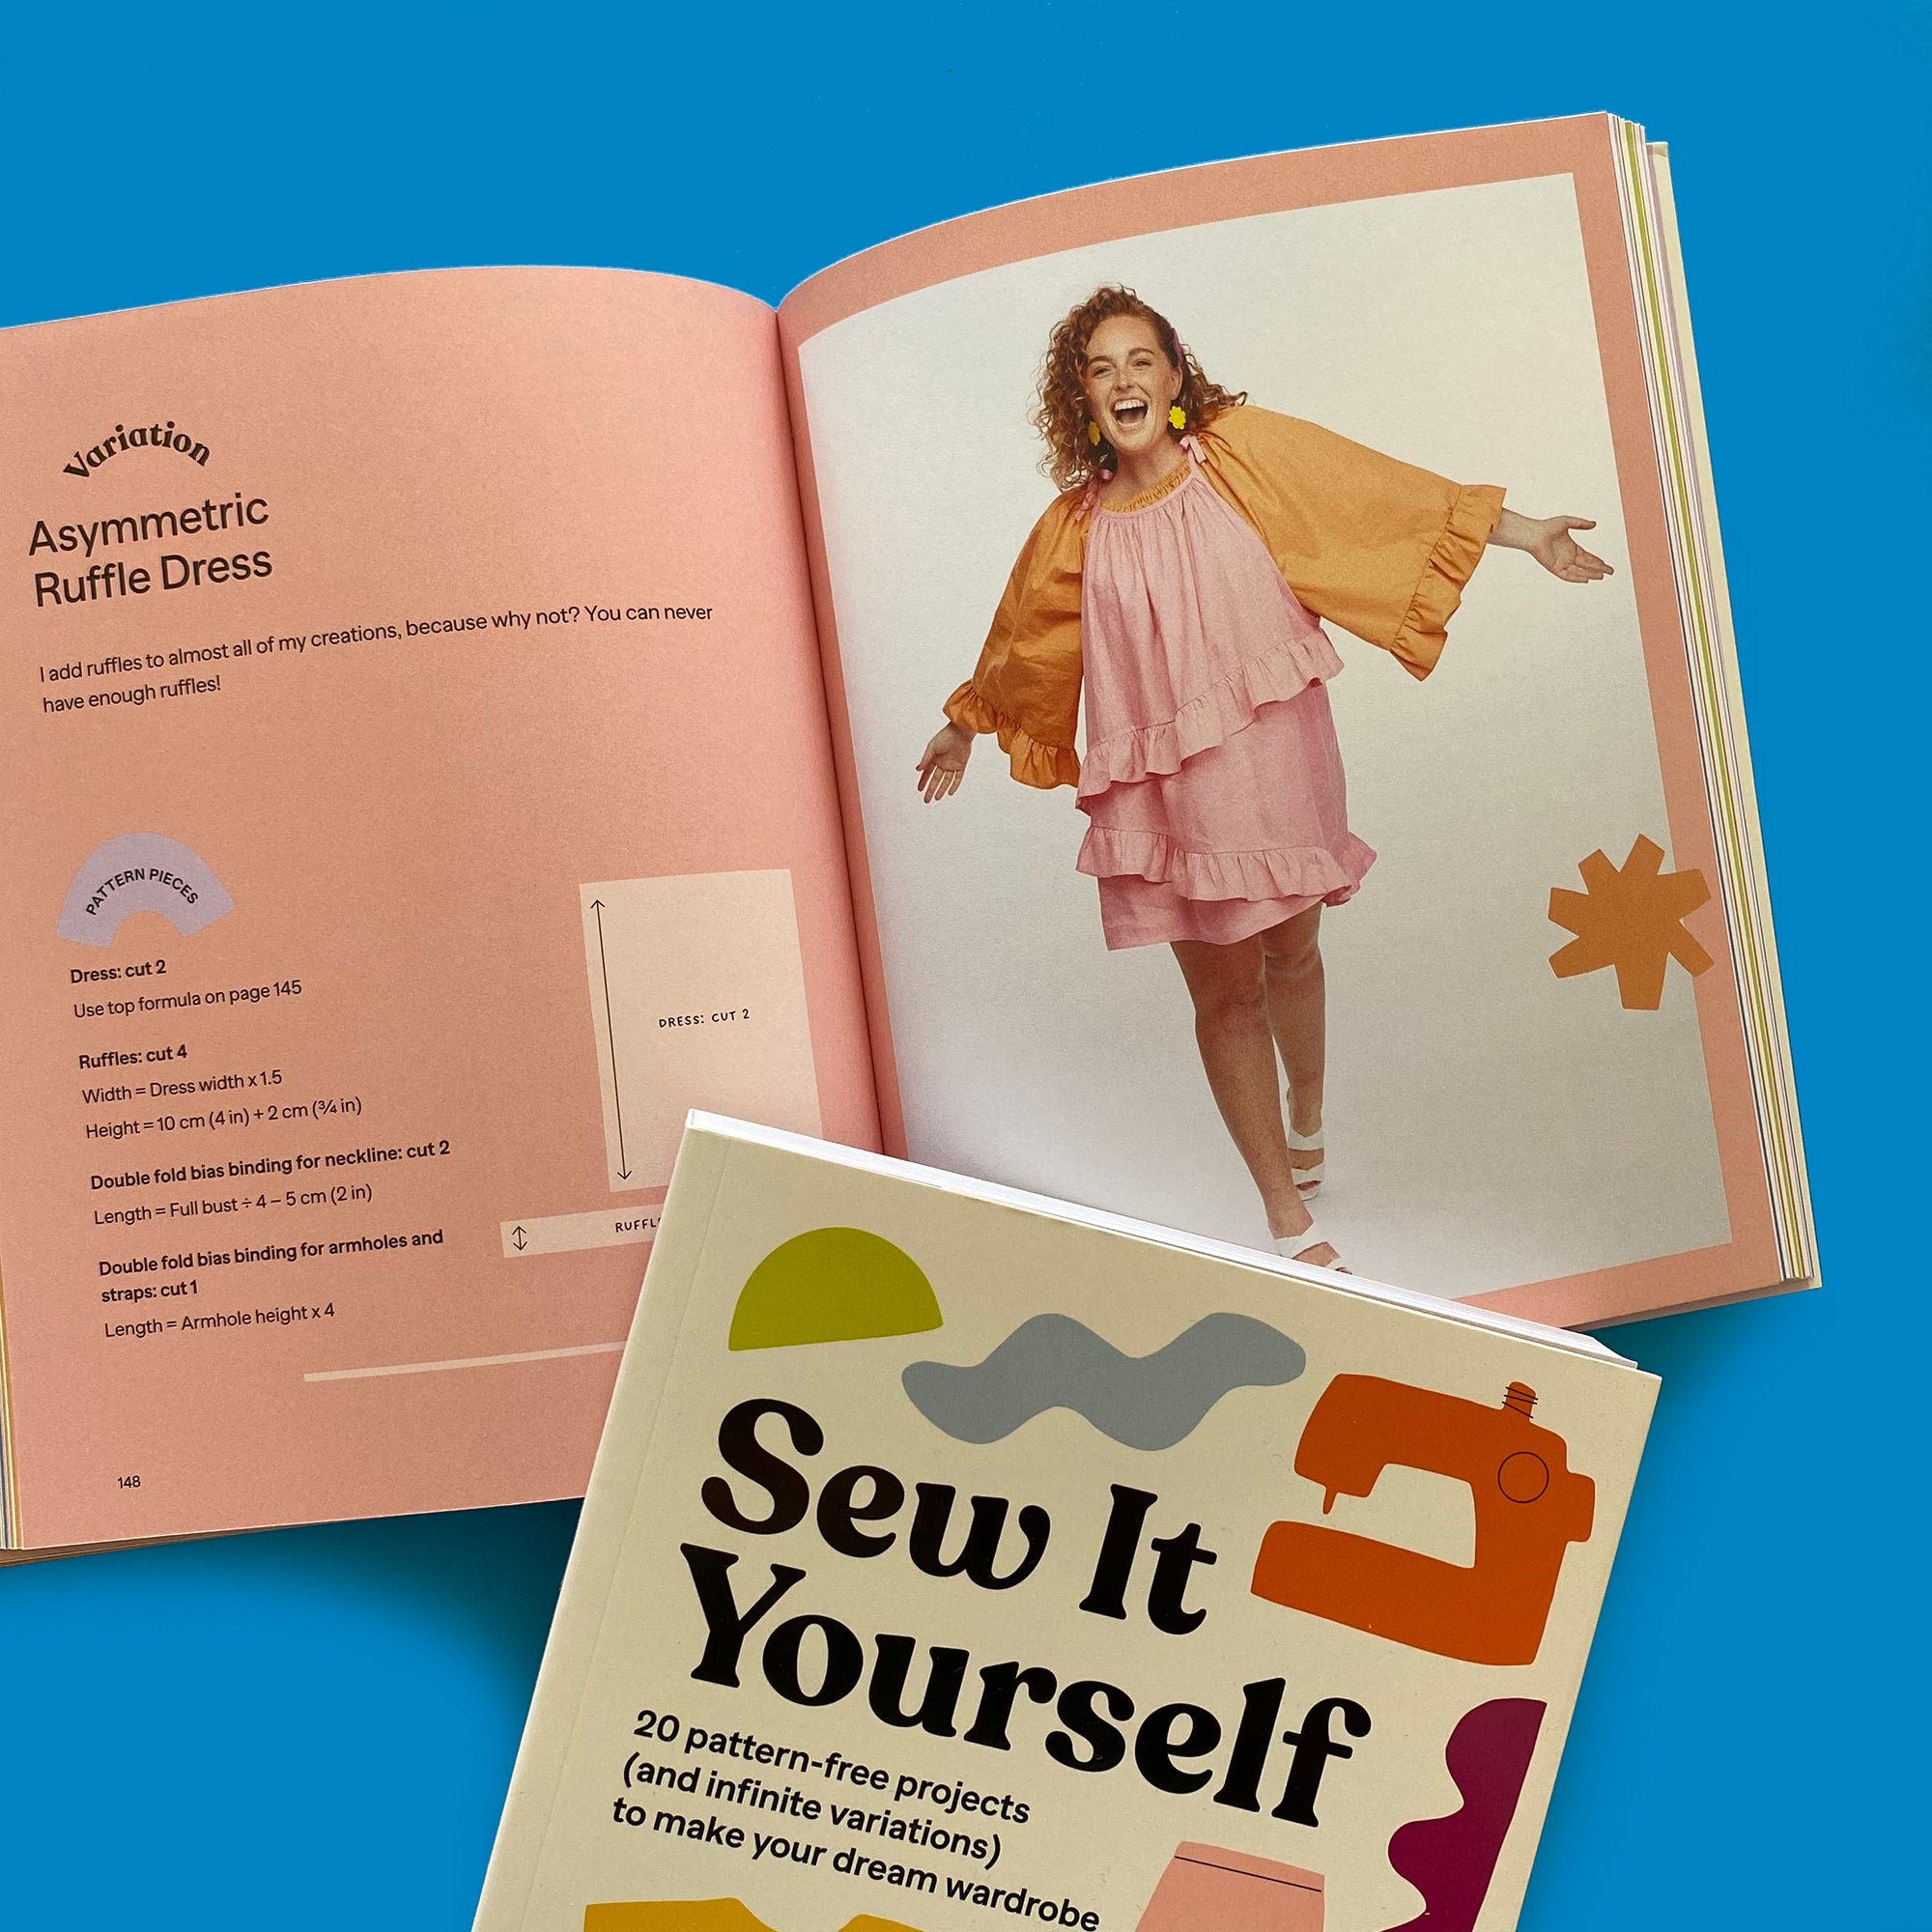 Sew It Yourself